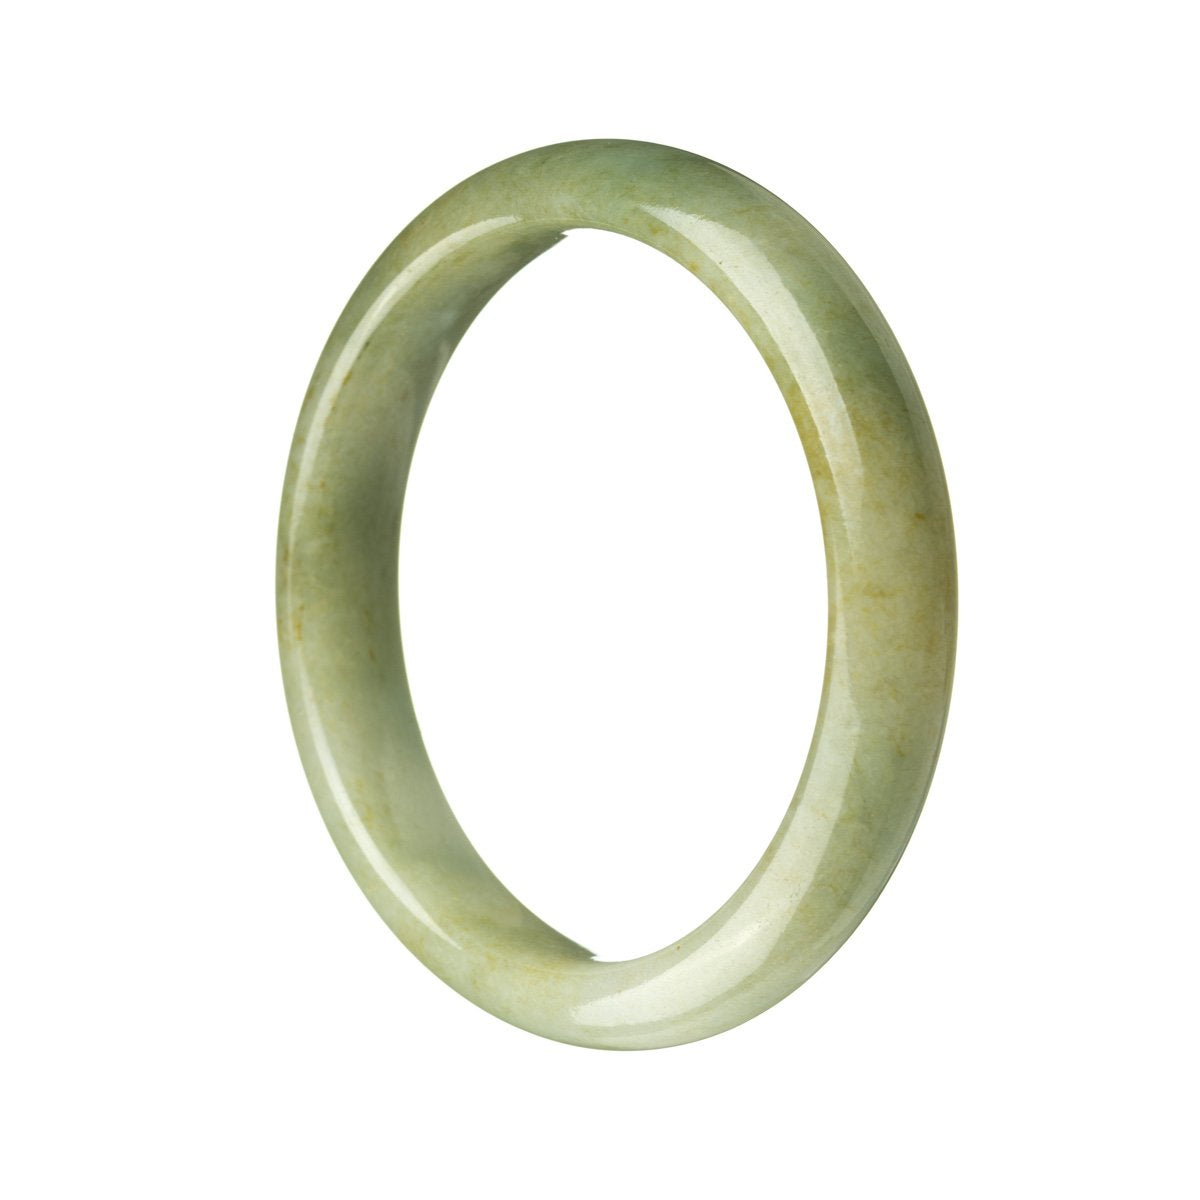 A close-up image of a stunning Burmese jade bangle bracelet, featuring a rich brownish green color. The bracelet is expertly crafted, showcasing a semi-round shape with a diameter of 56mm. This authentic Grade A jade piece is a true gem, exuding elegance and beauty.